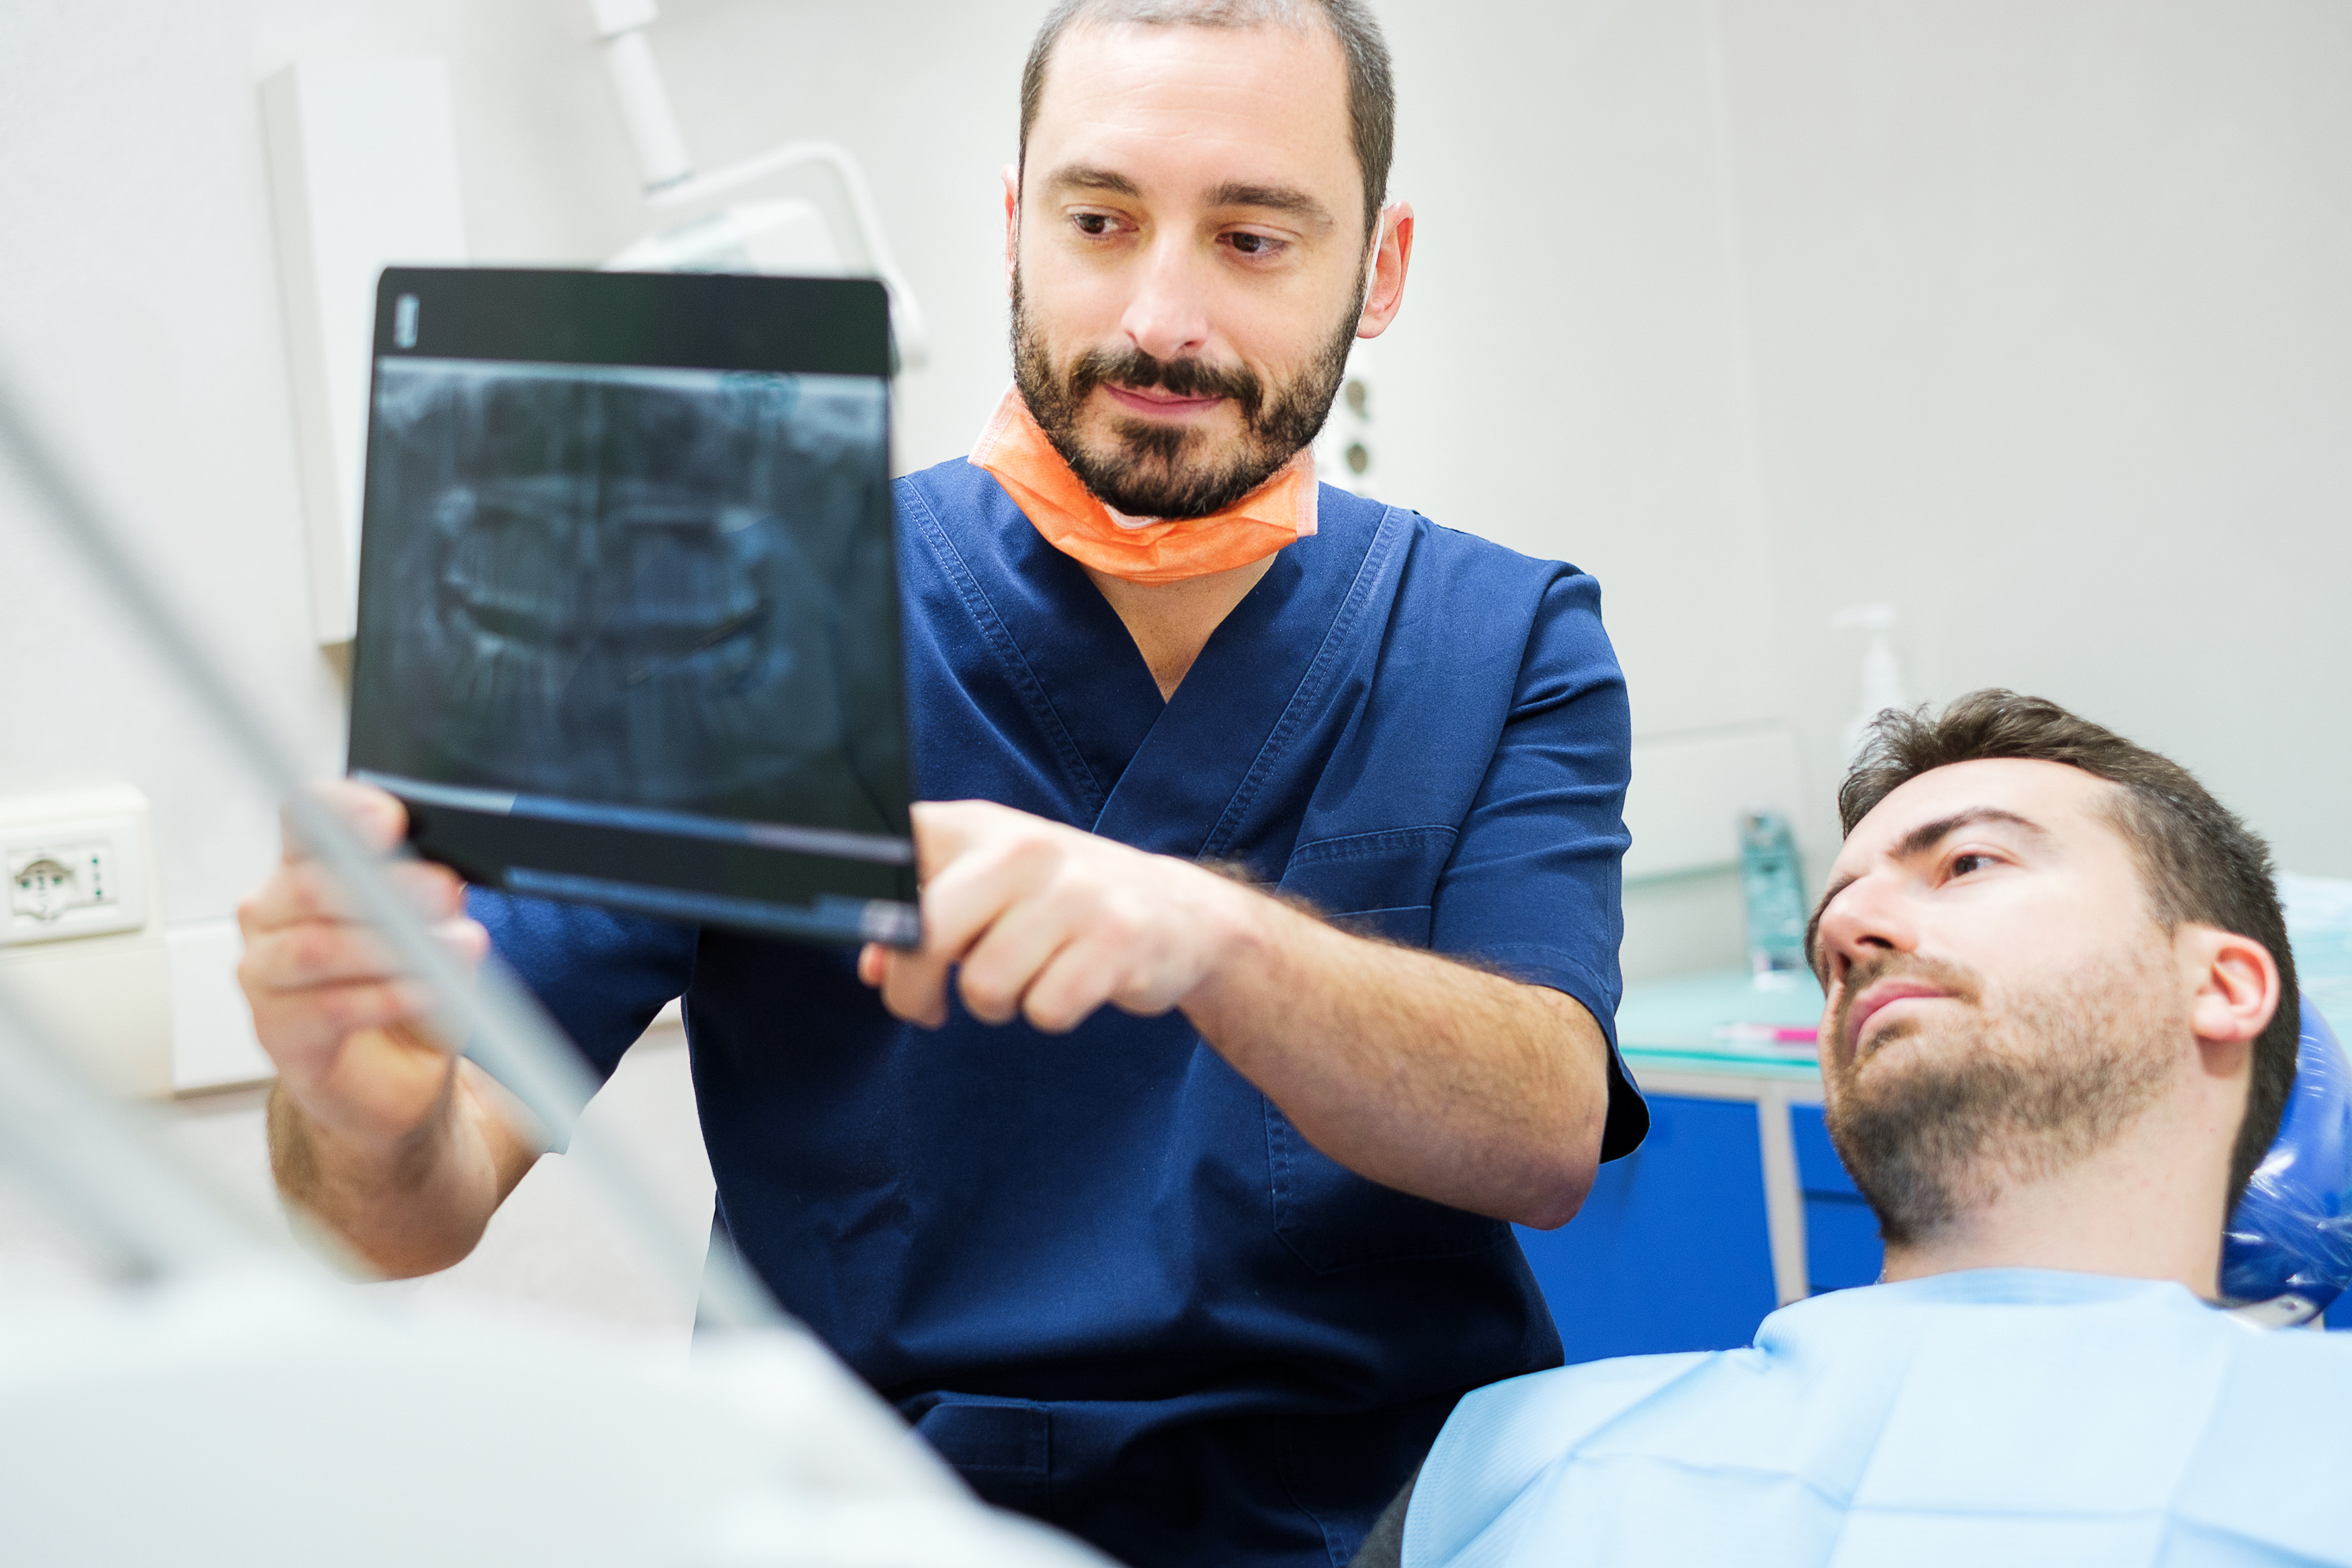 7 signs you may need root canal therapy